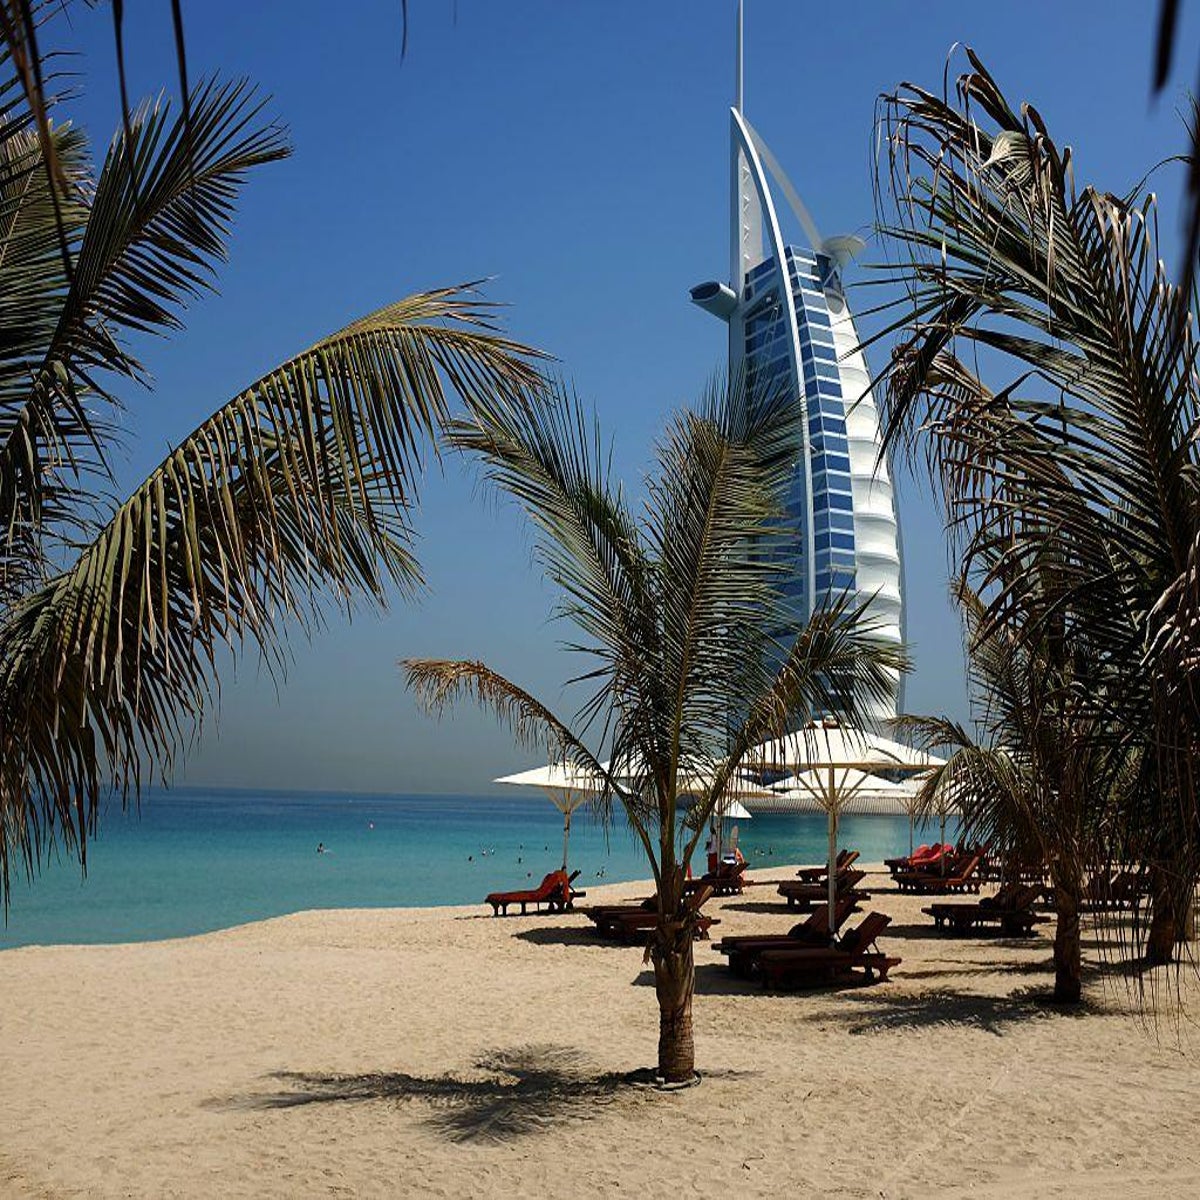 Nudist Dancing On The Beach - What not to do in Dubai as a tourist | The Independent | The Independent